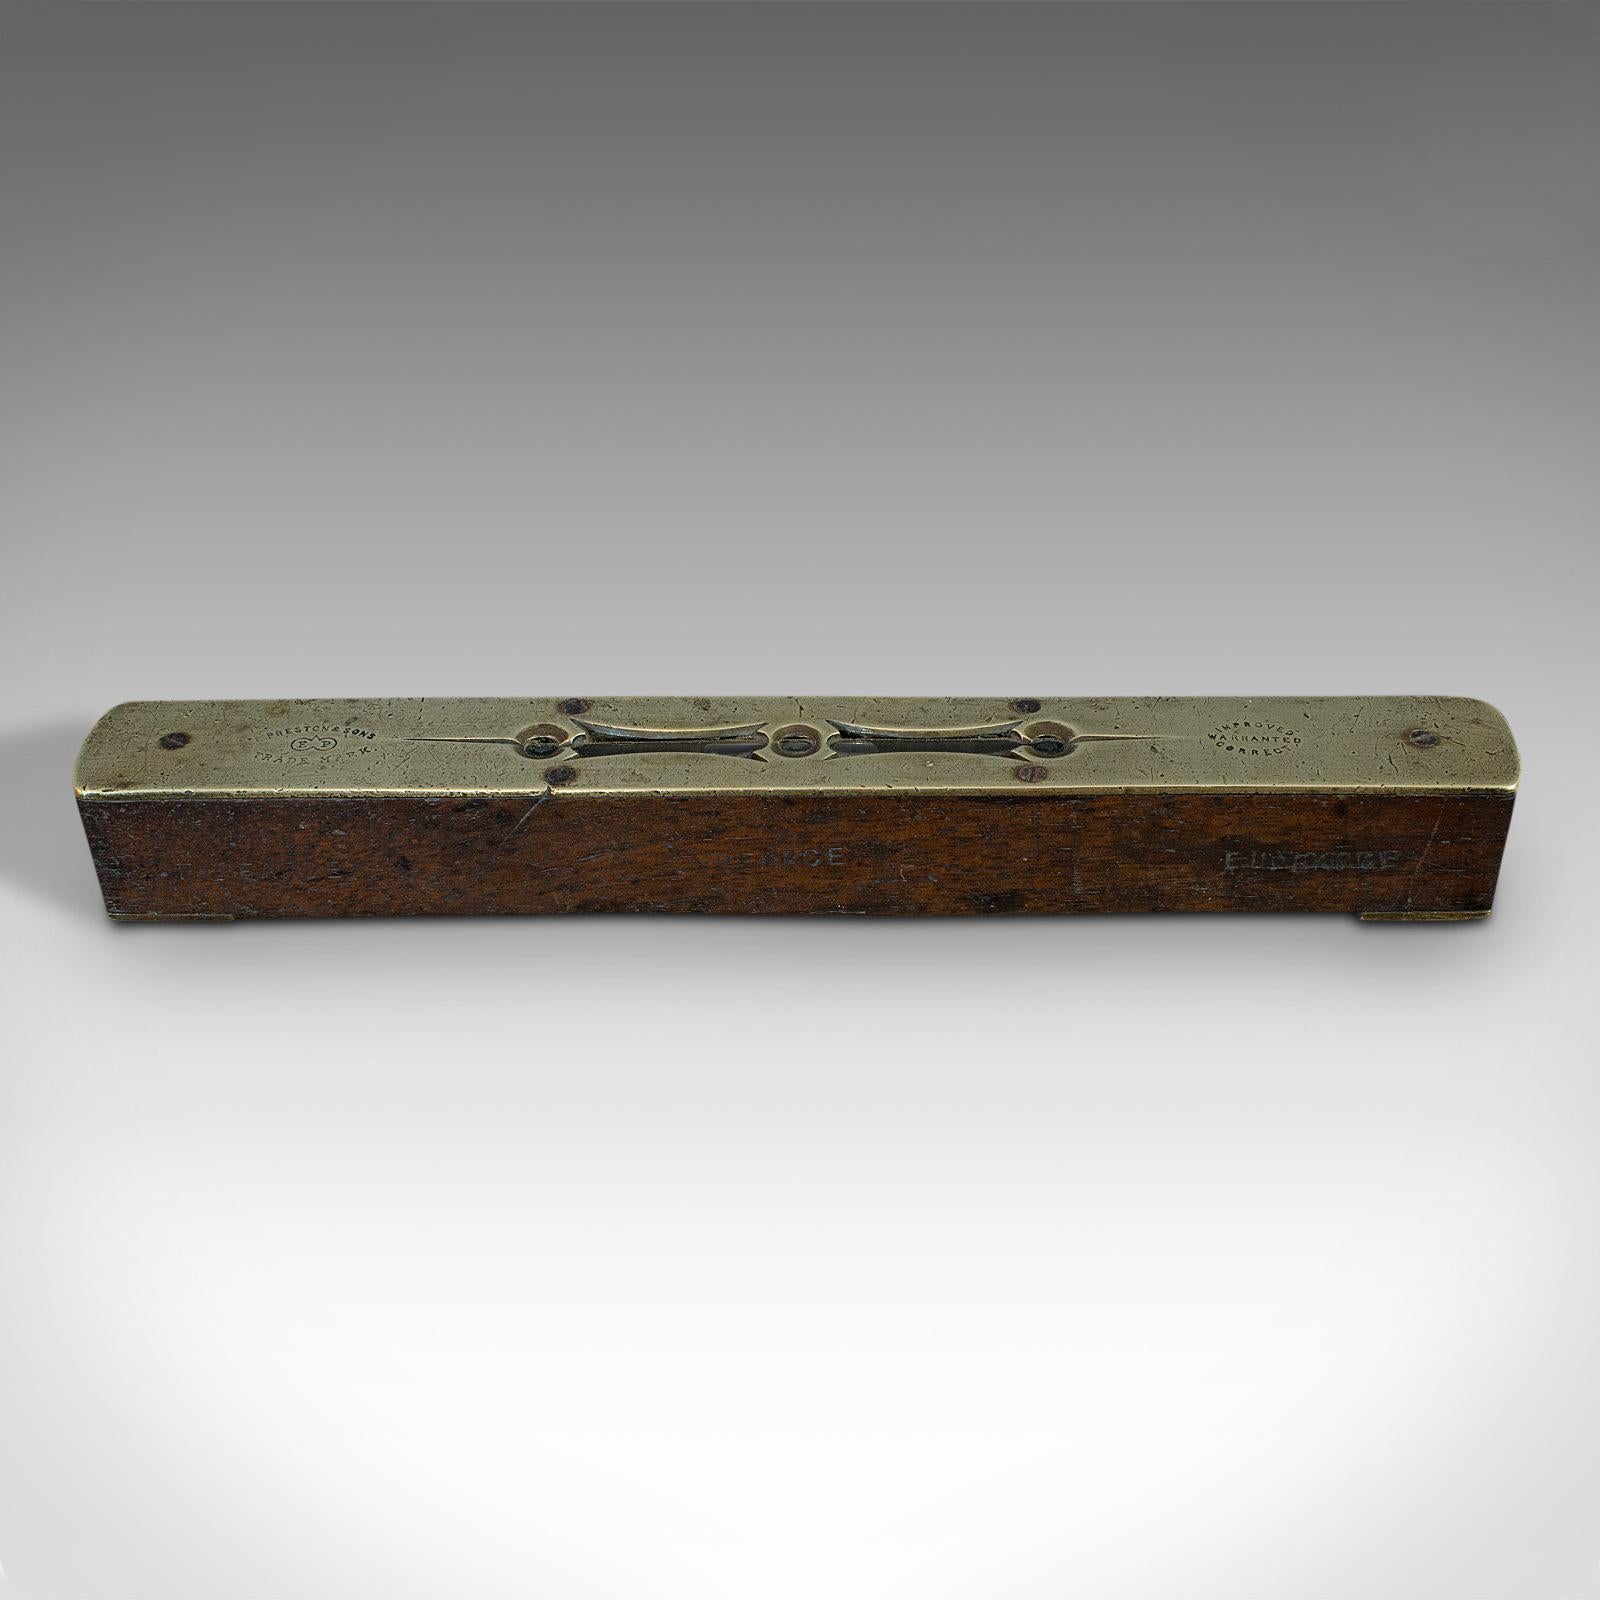 This is a vintage spirit level. An English, rosewood and brass instrument by Preston and Sons, dating to the mid-20th century, circa 1930.

Attractive craftsman's level
Displays a desirable aged patina
Body in rosewood with rich russet